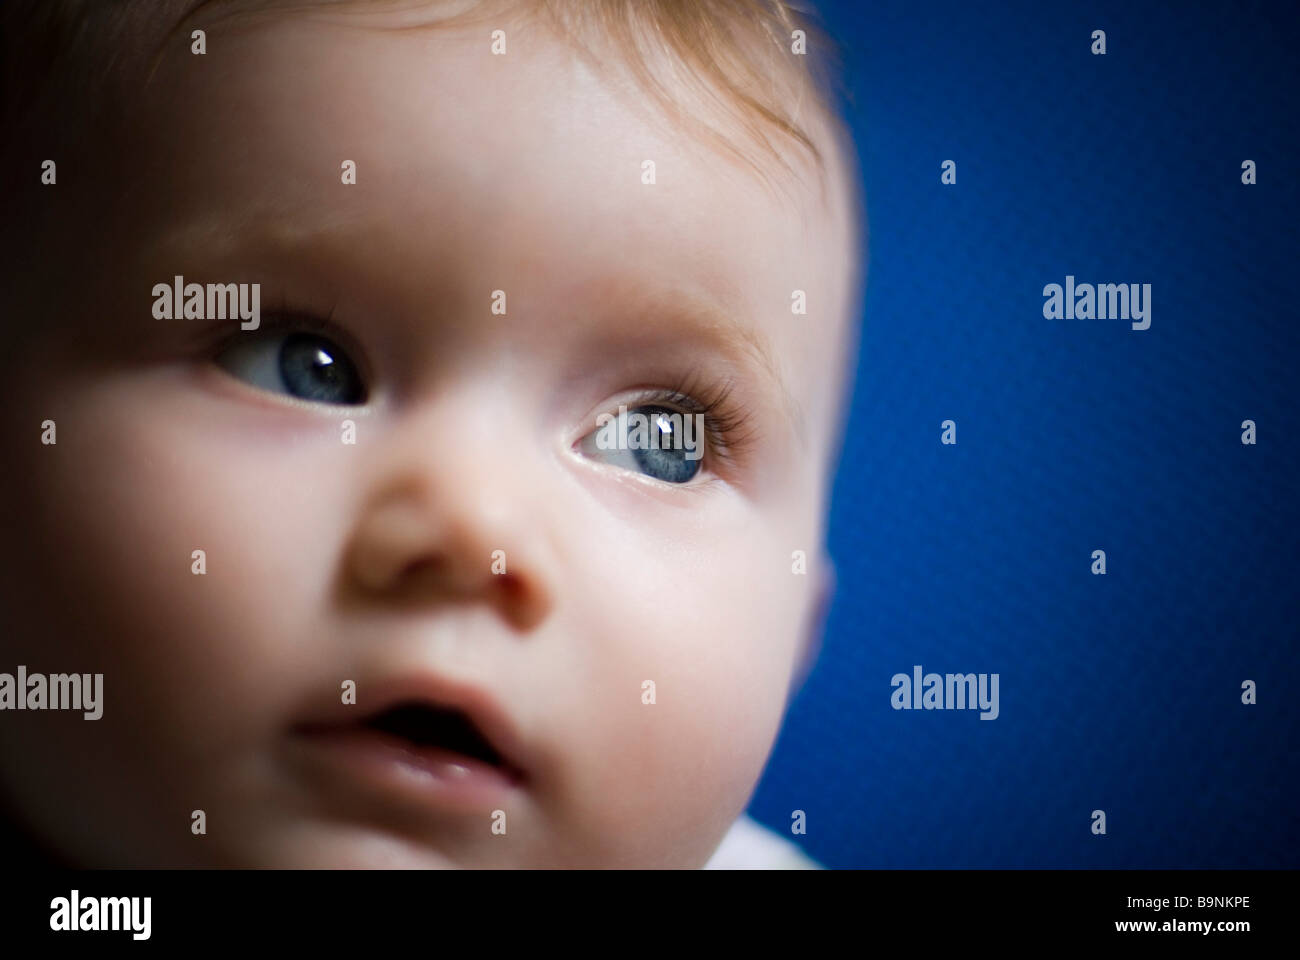 Close up of baby's face Stock Photo